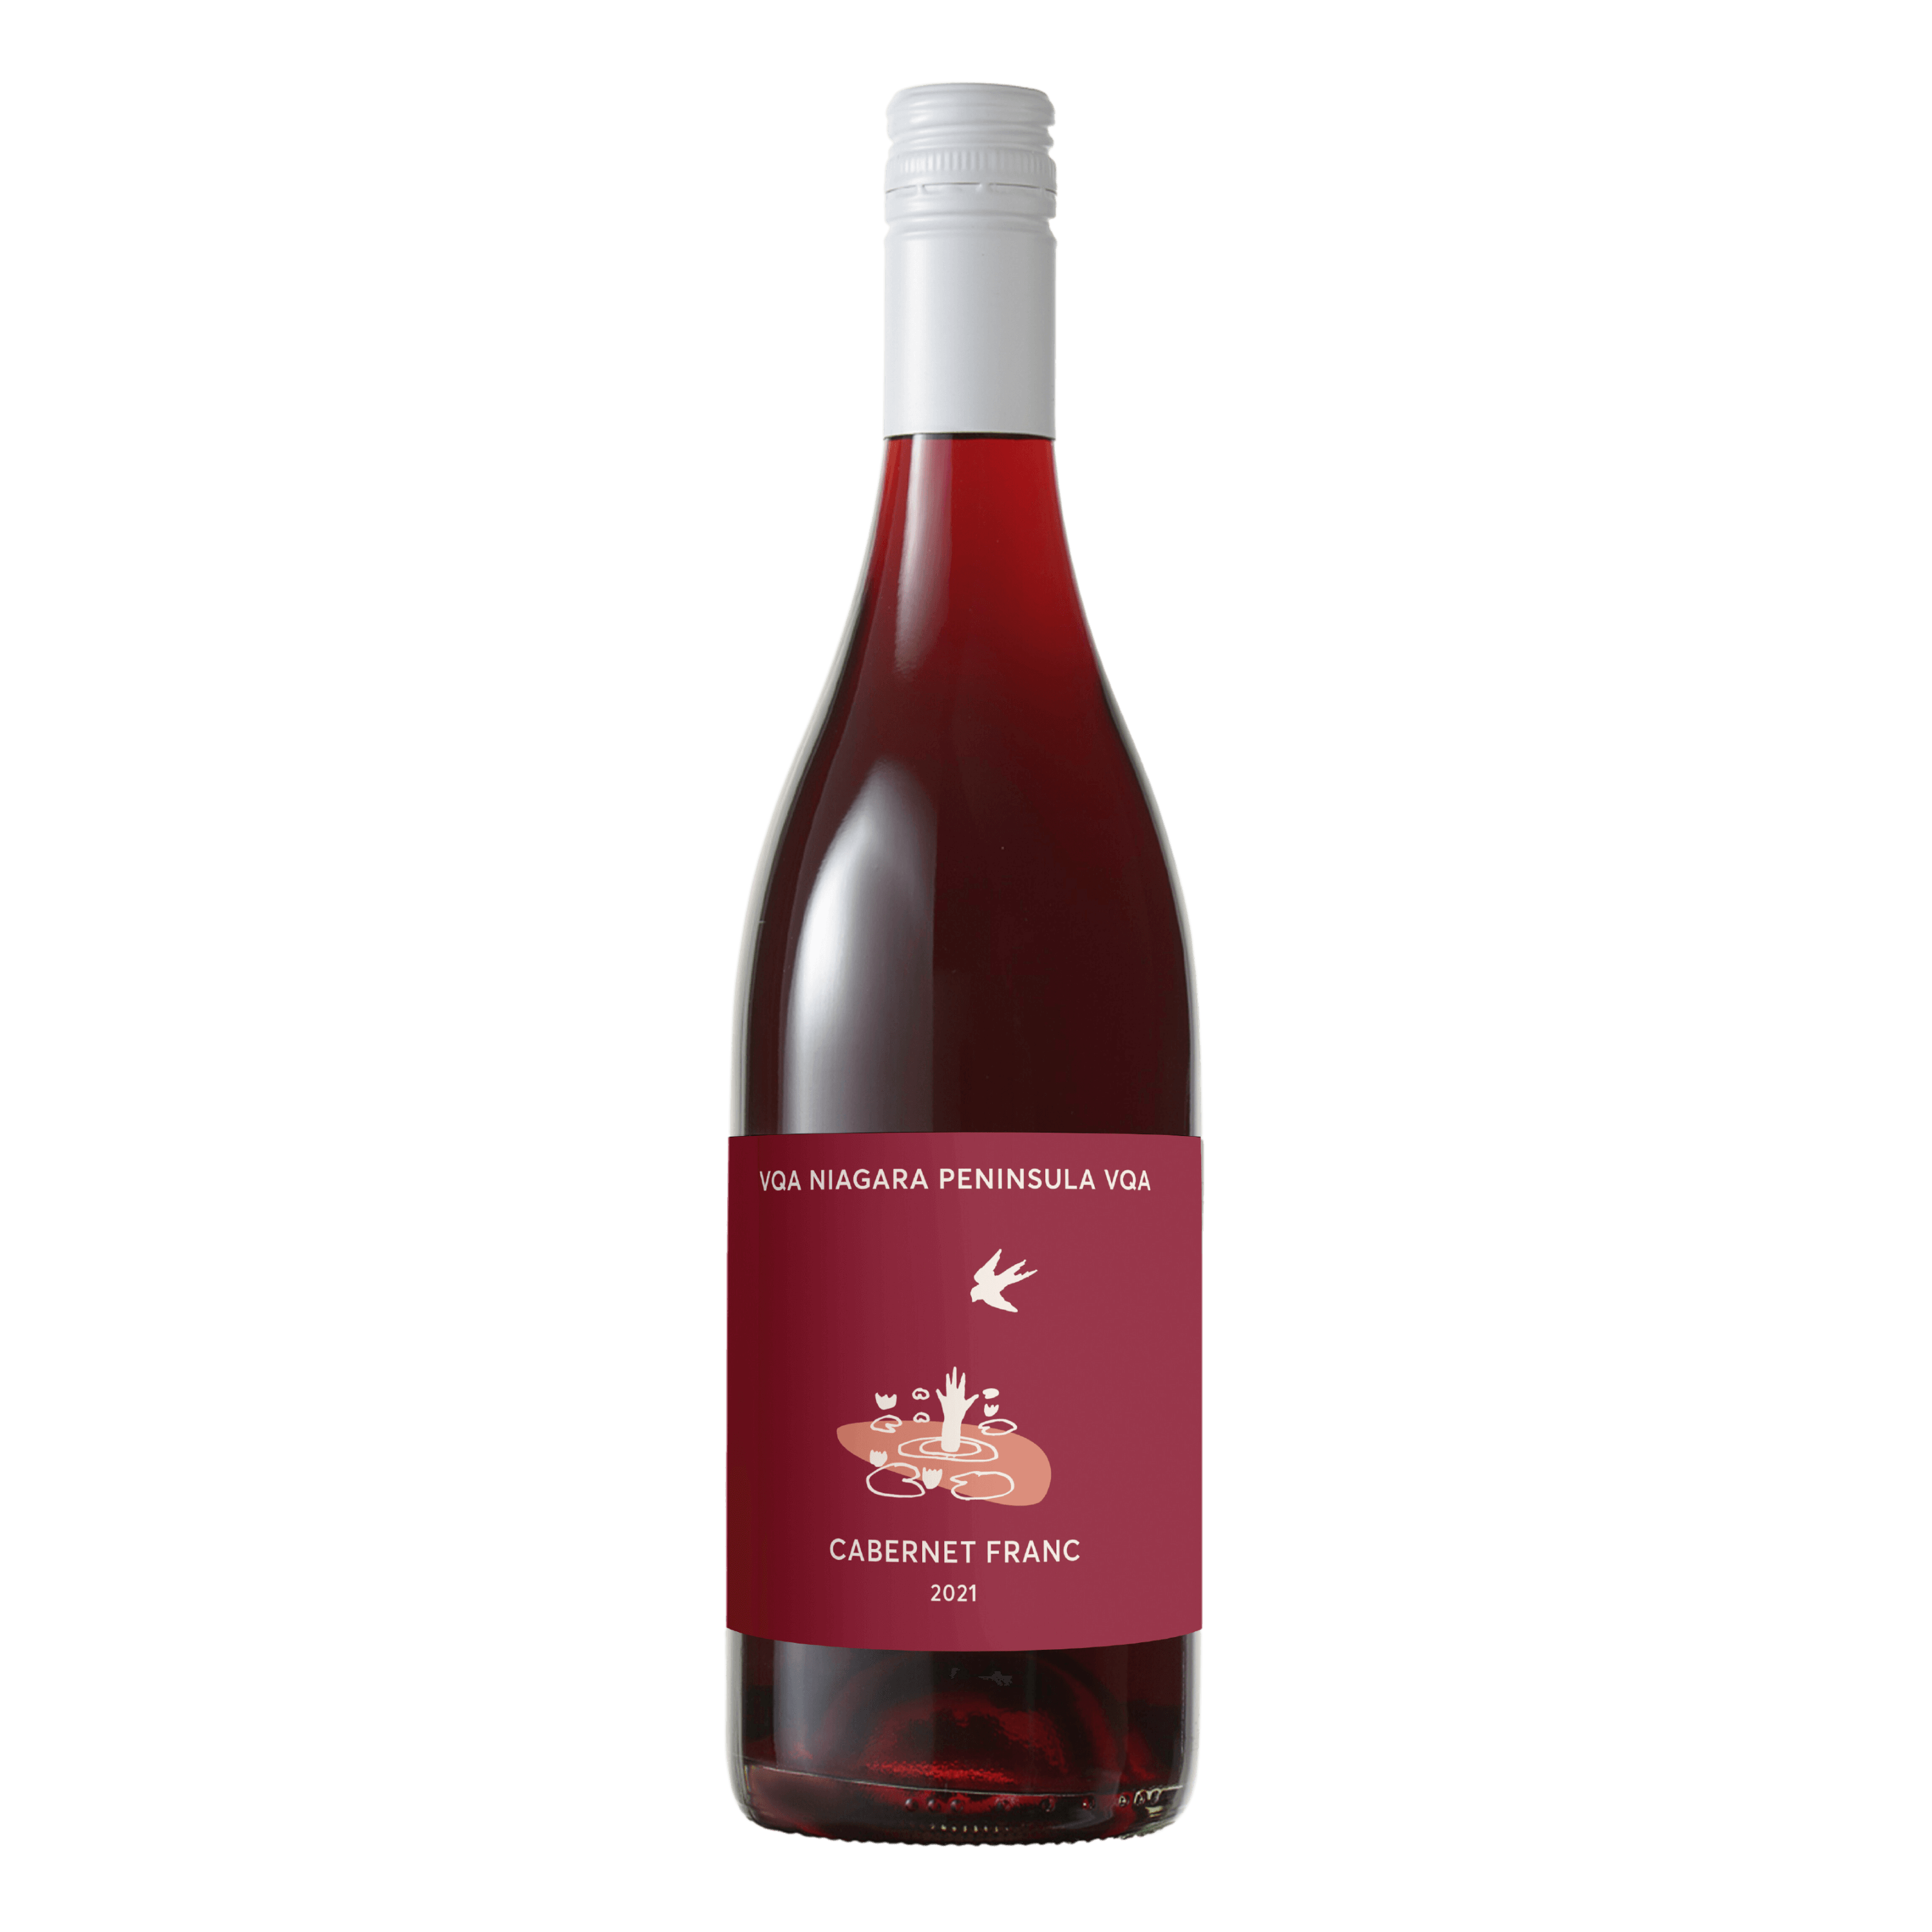 Bundle pack of red merlot gamay baco carbenet franc natural wines from Traynor Family Vineyard a winery in Prince Edward County, Ontario